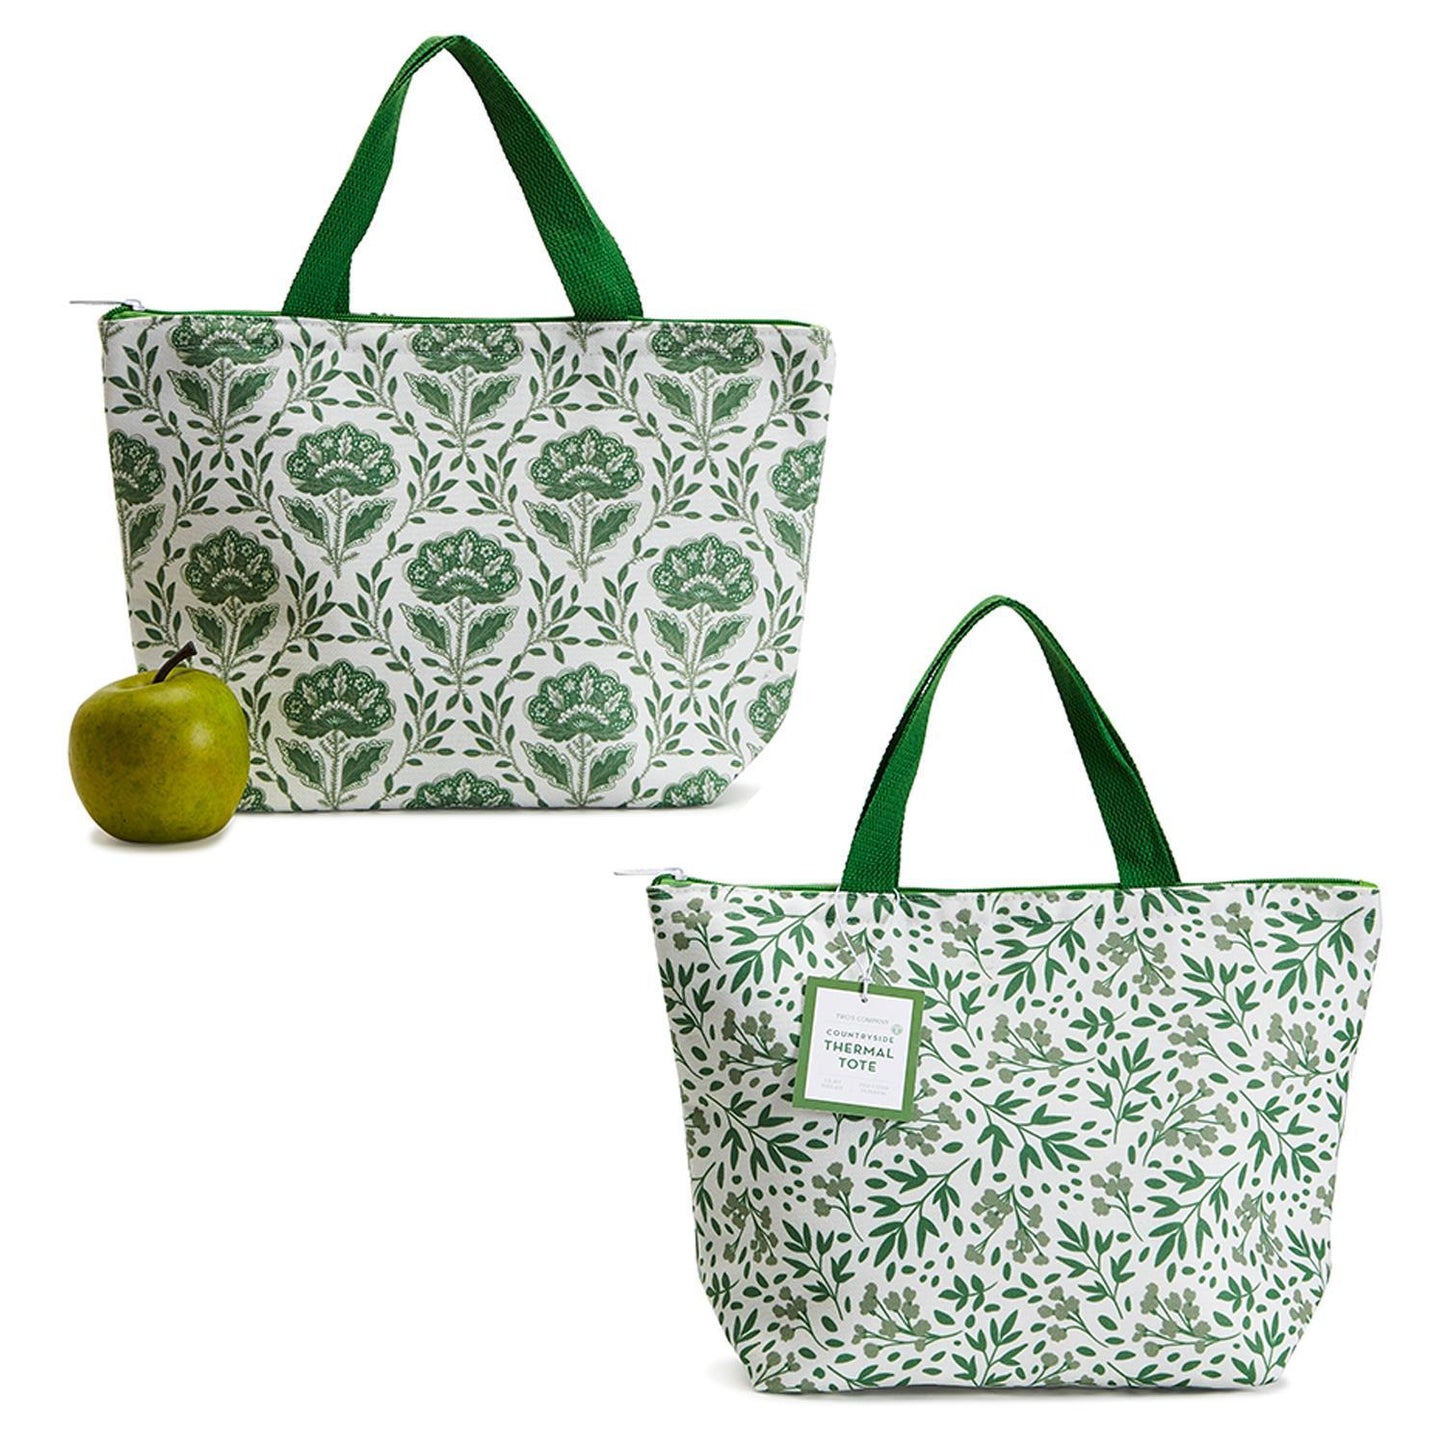 Lunch tote- Garden pattern, Thermal